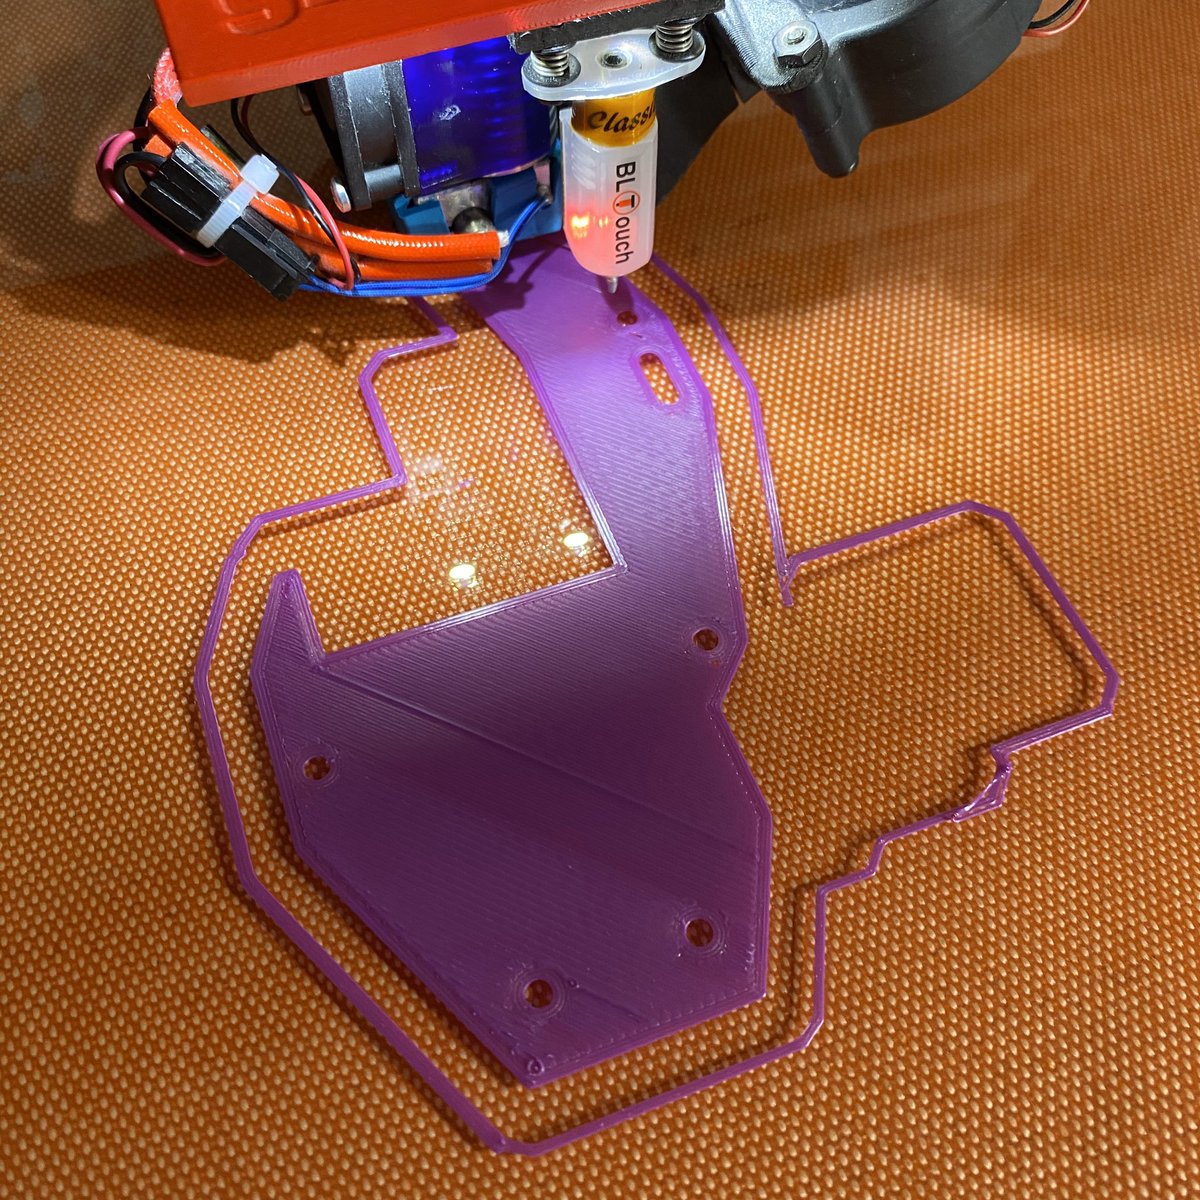 And if you guessed Purple PLA for the test print, you’d be correct. On the glass, no heat, no adhesive additives.